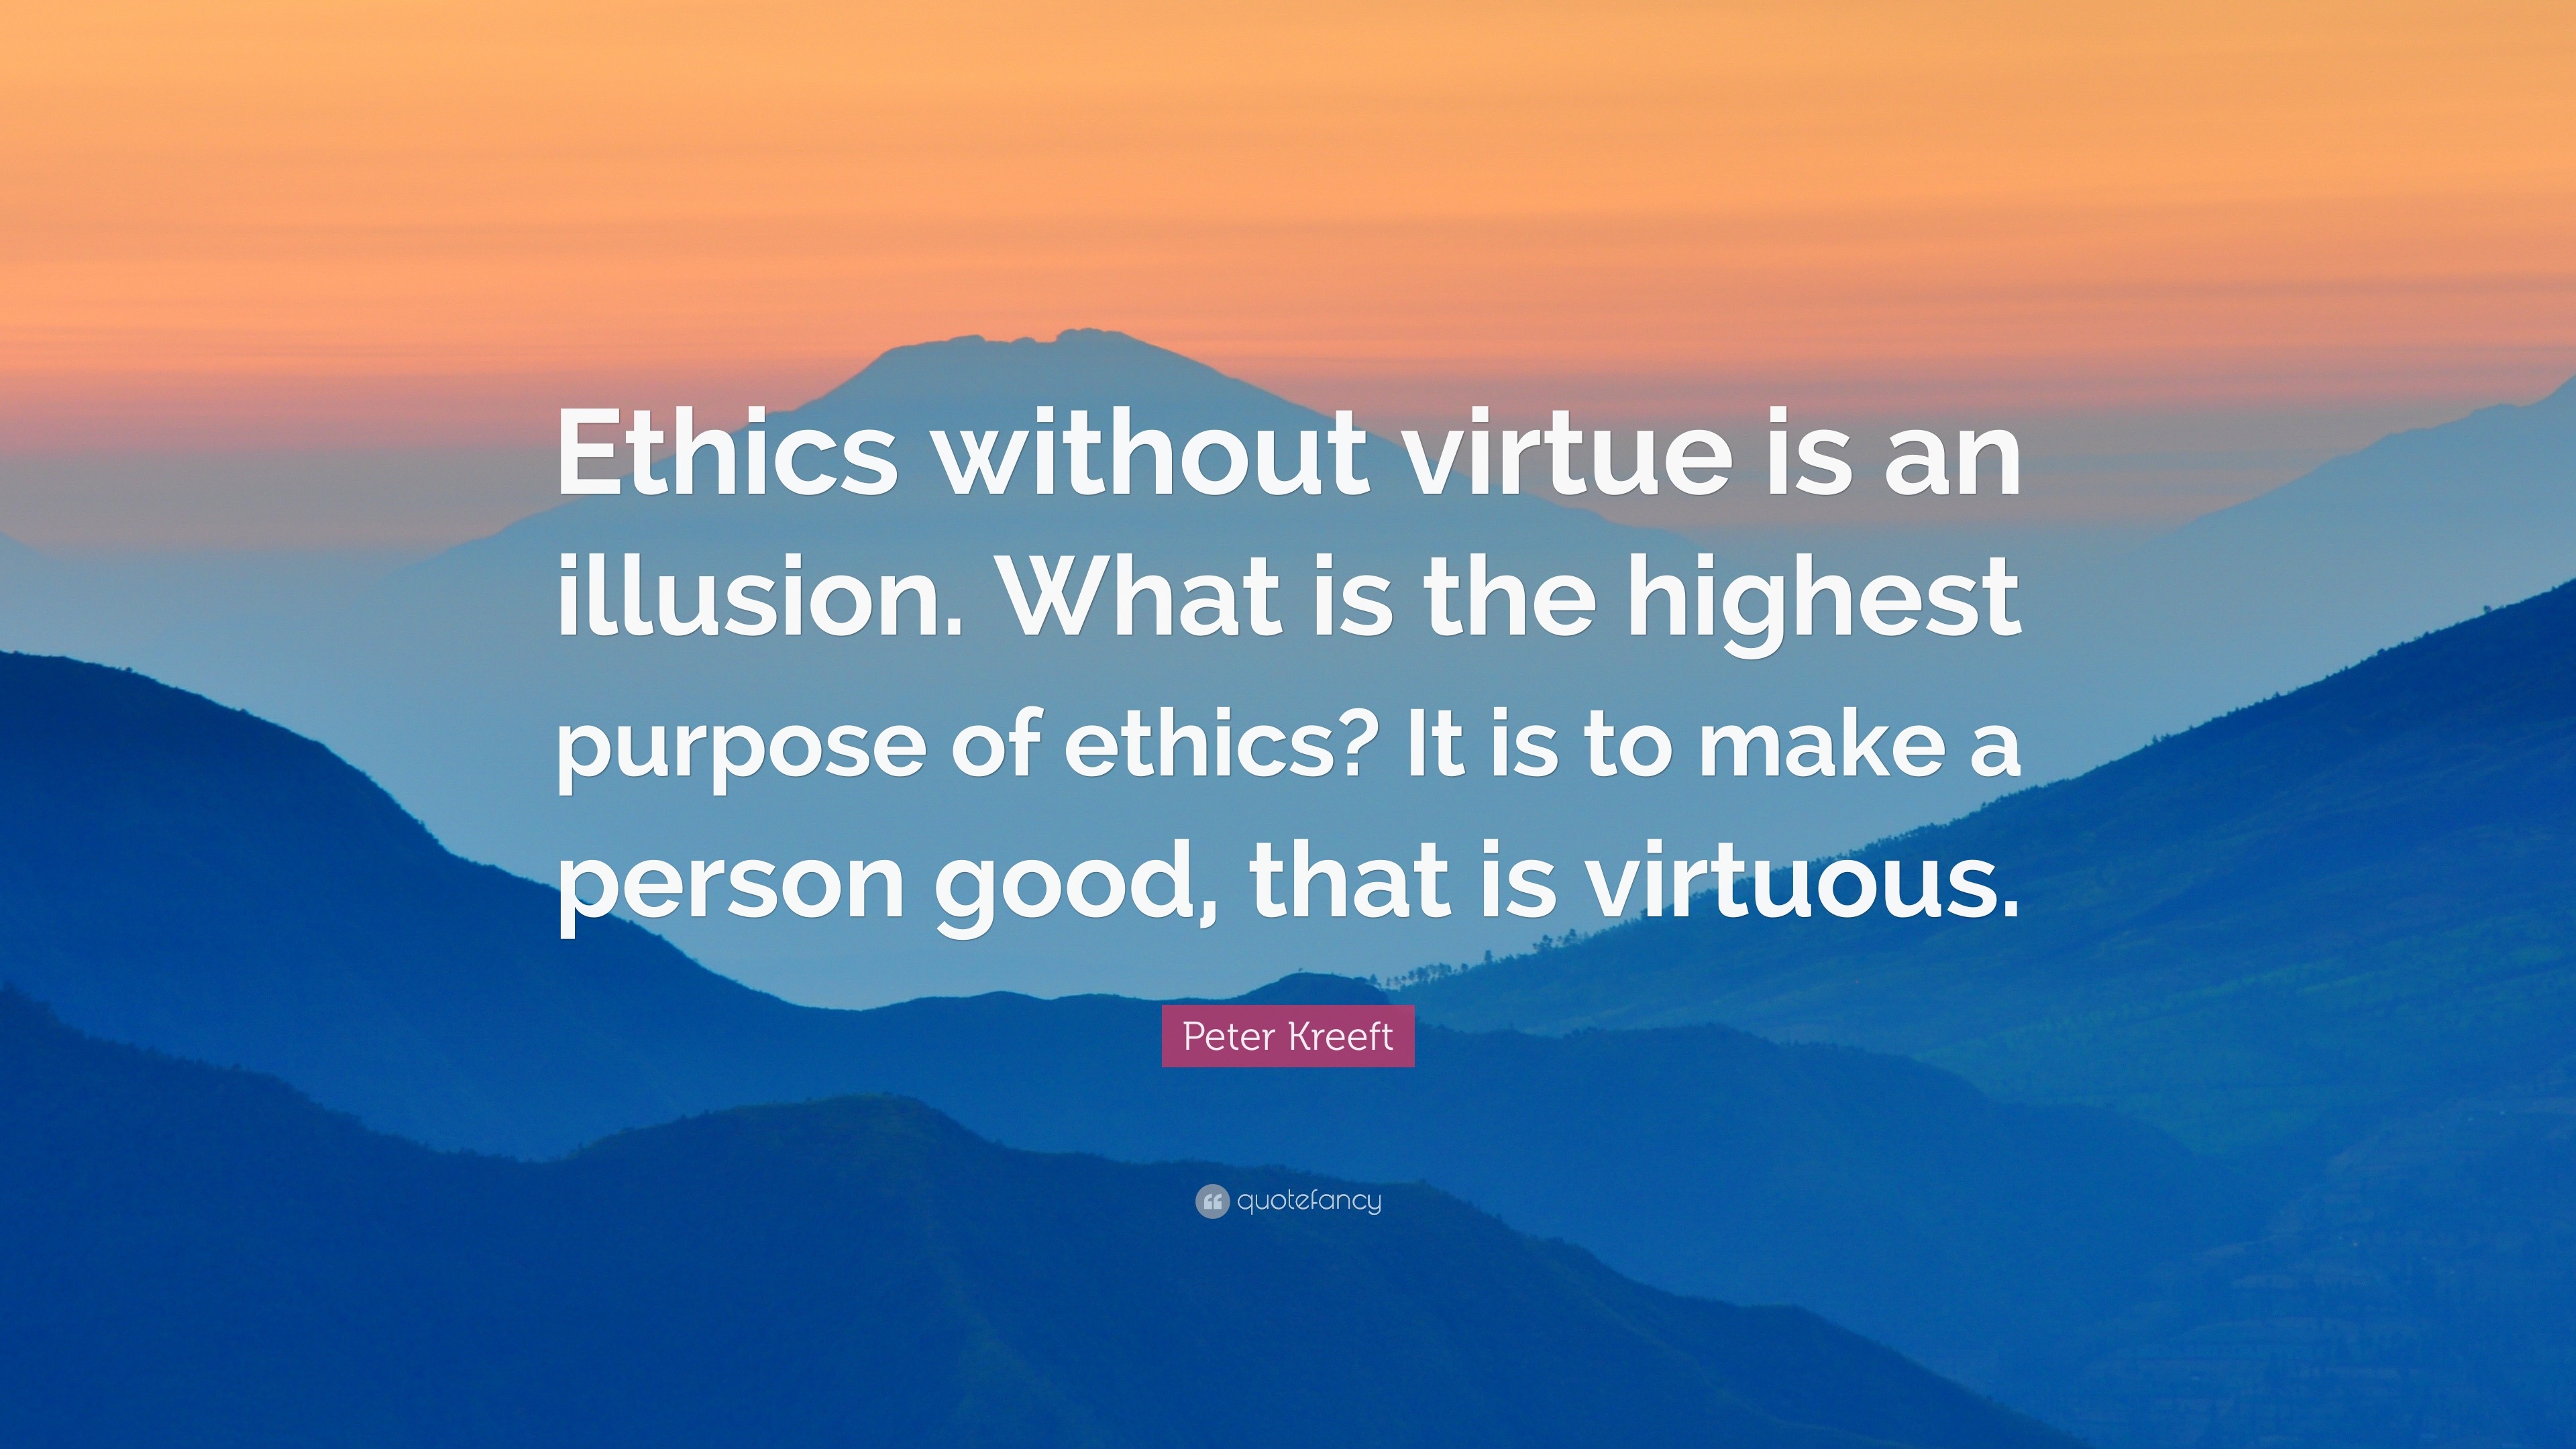 Peter Kreeft Quote: “Ethics without virtue is an illusion. What is the